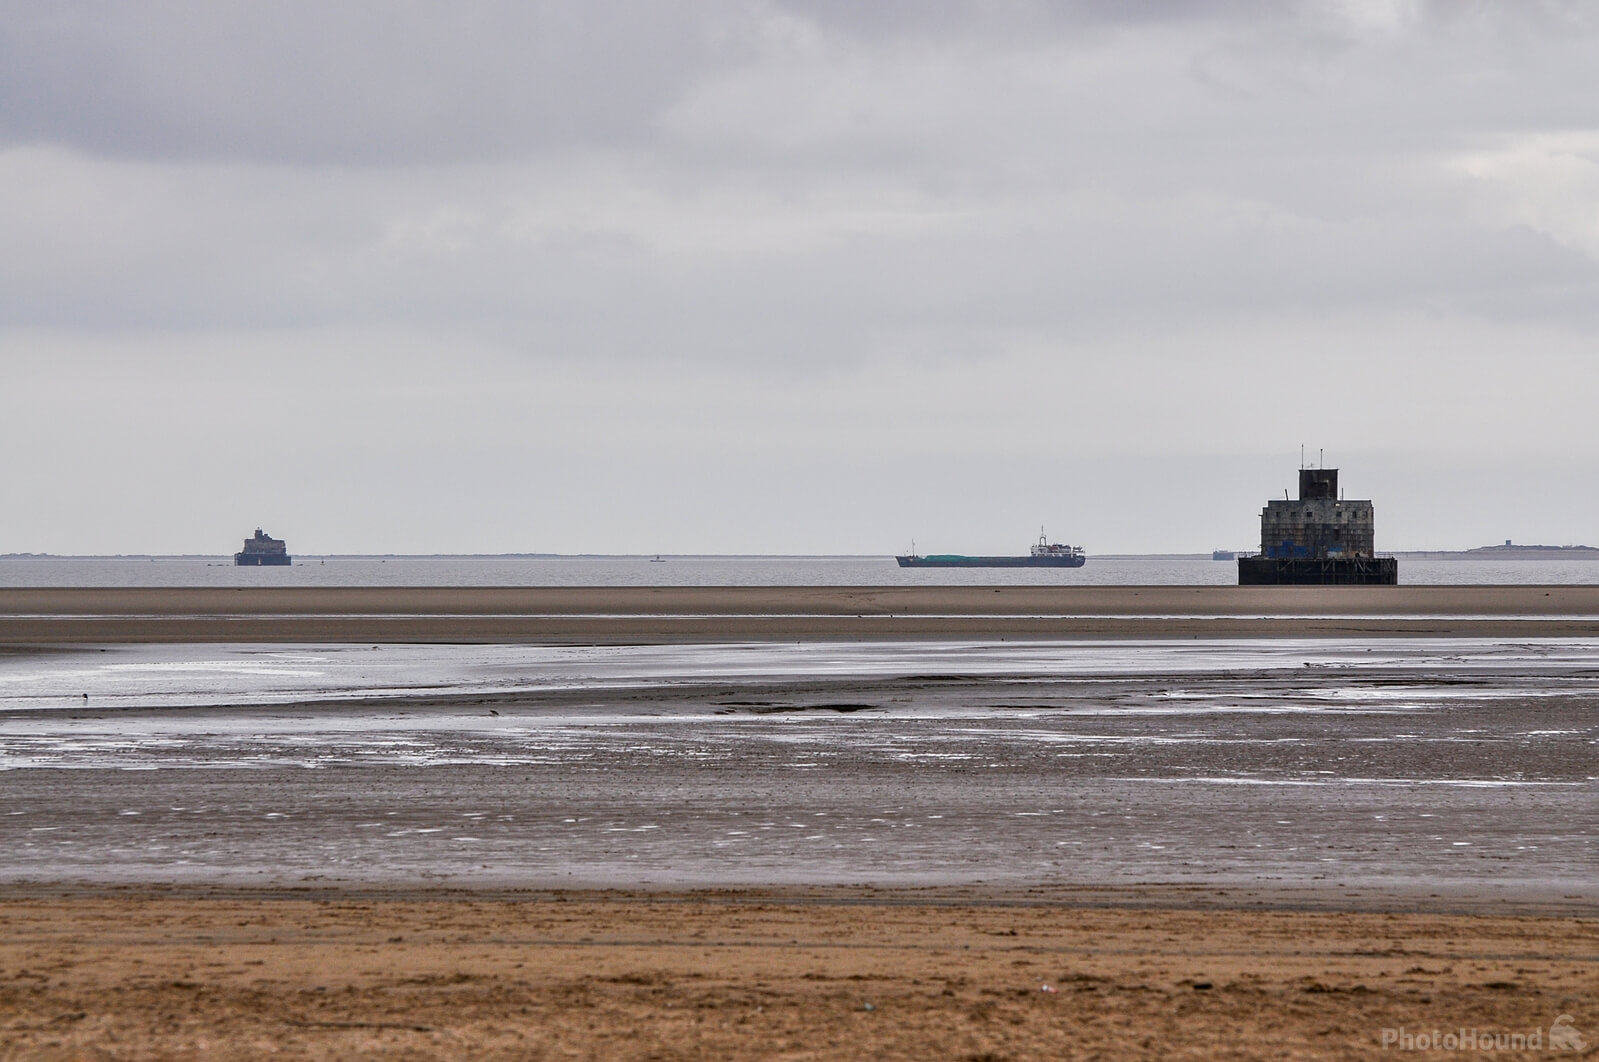 Image of Haille Fort, Humber Estuary by Kev Graham